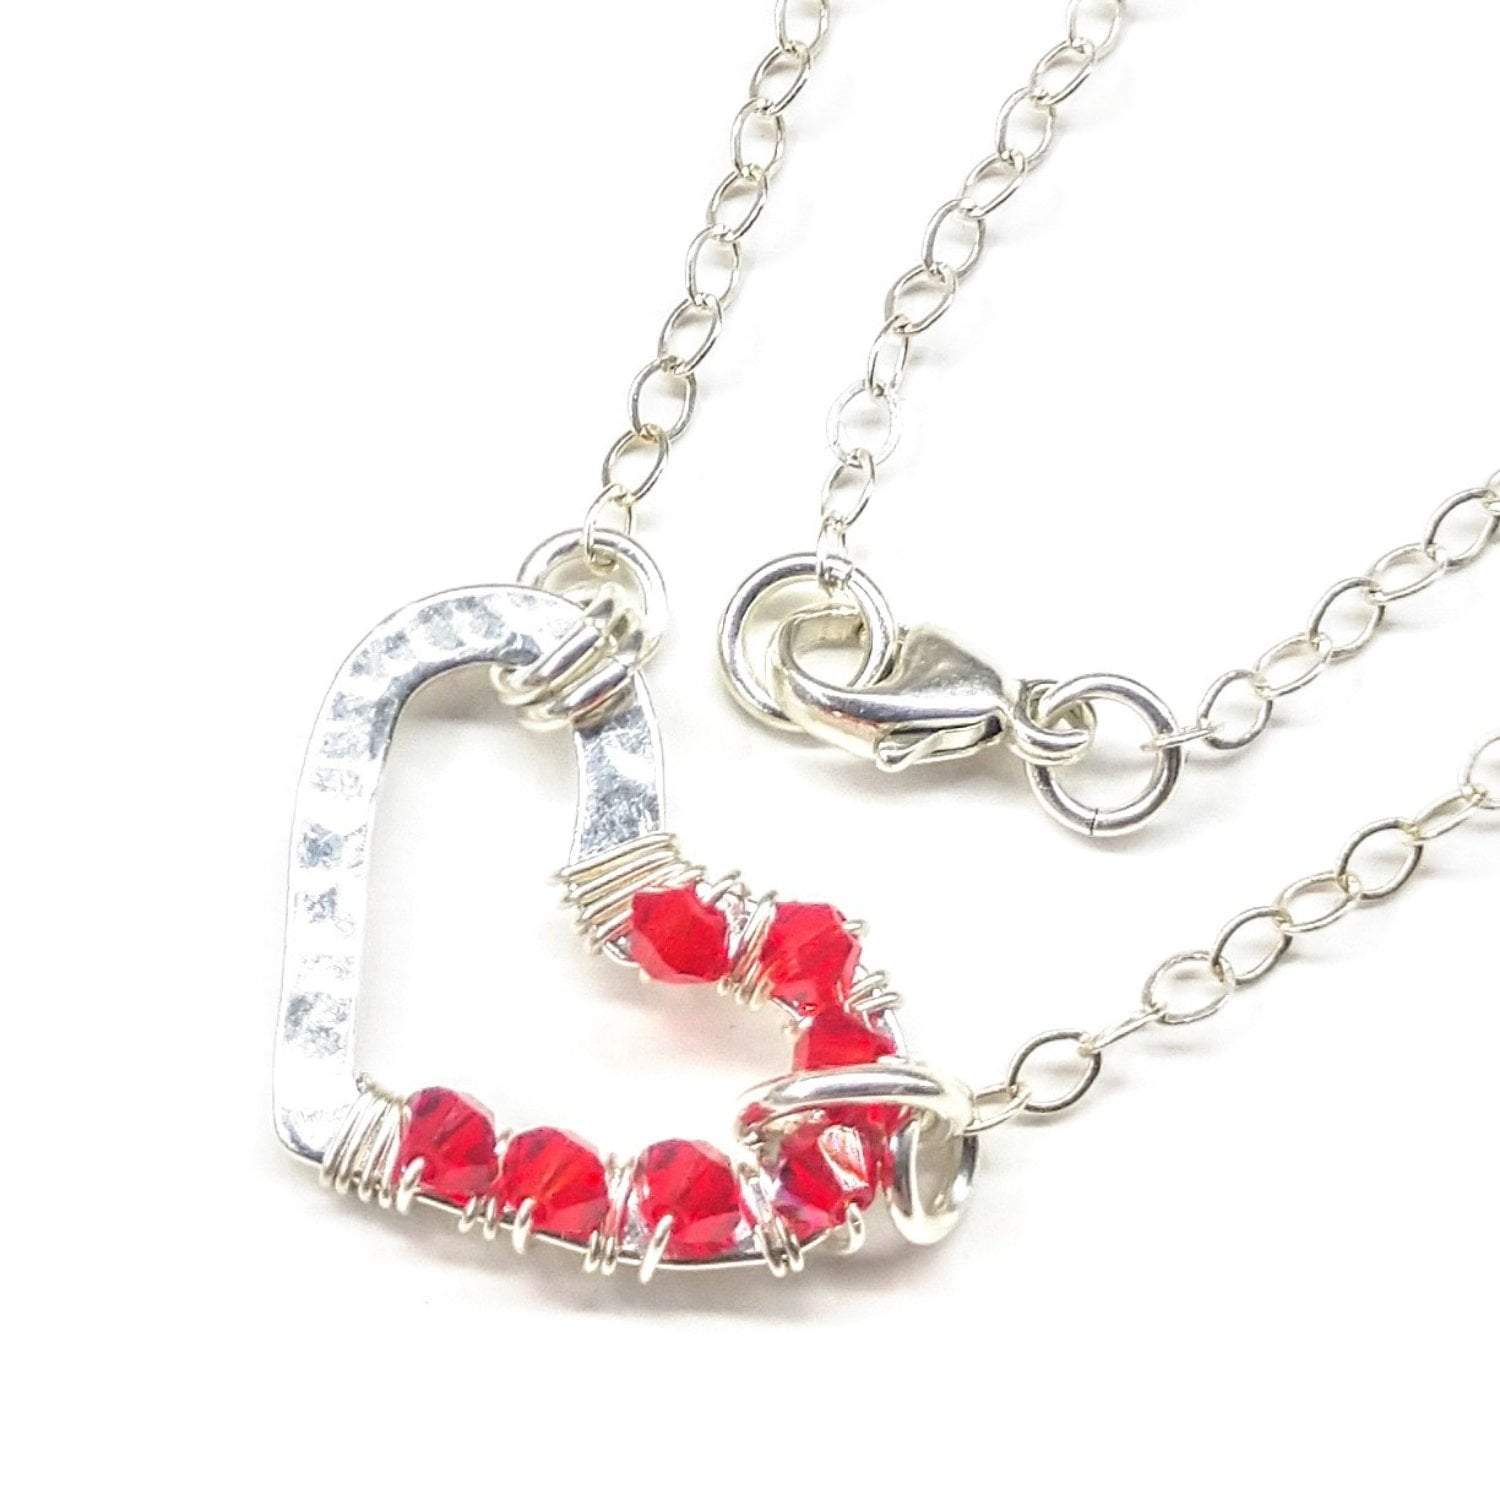 Handmade Hammered Silver Heart Necklace with Red Crystals - Sterling Silver Pendant on Cable Chain - Necklaces - Bijou Her -  -  - 